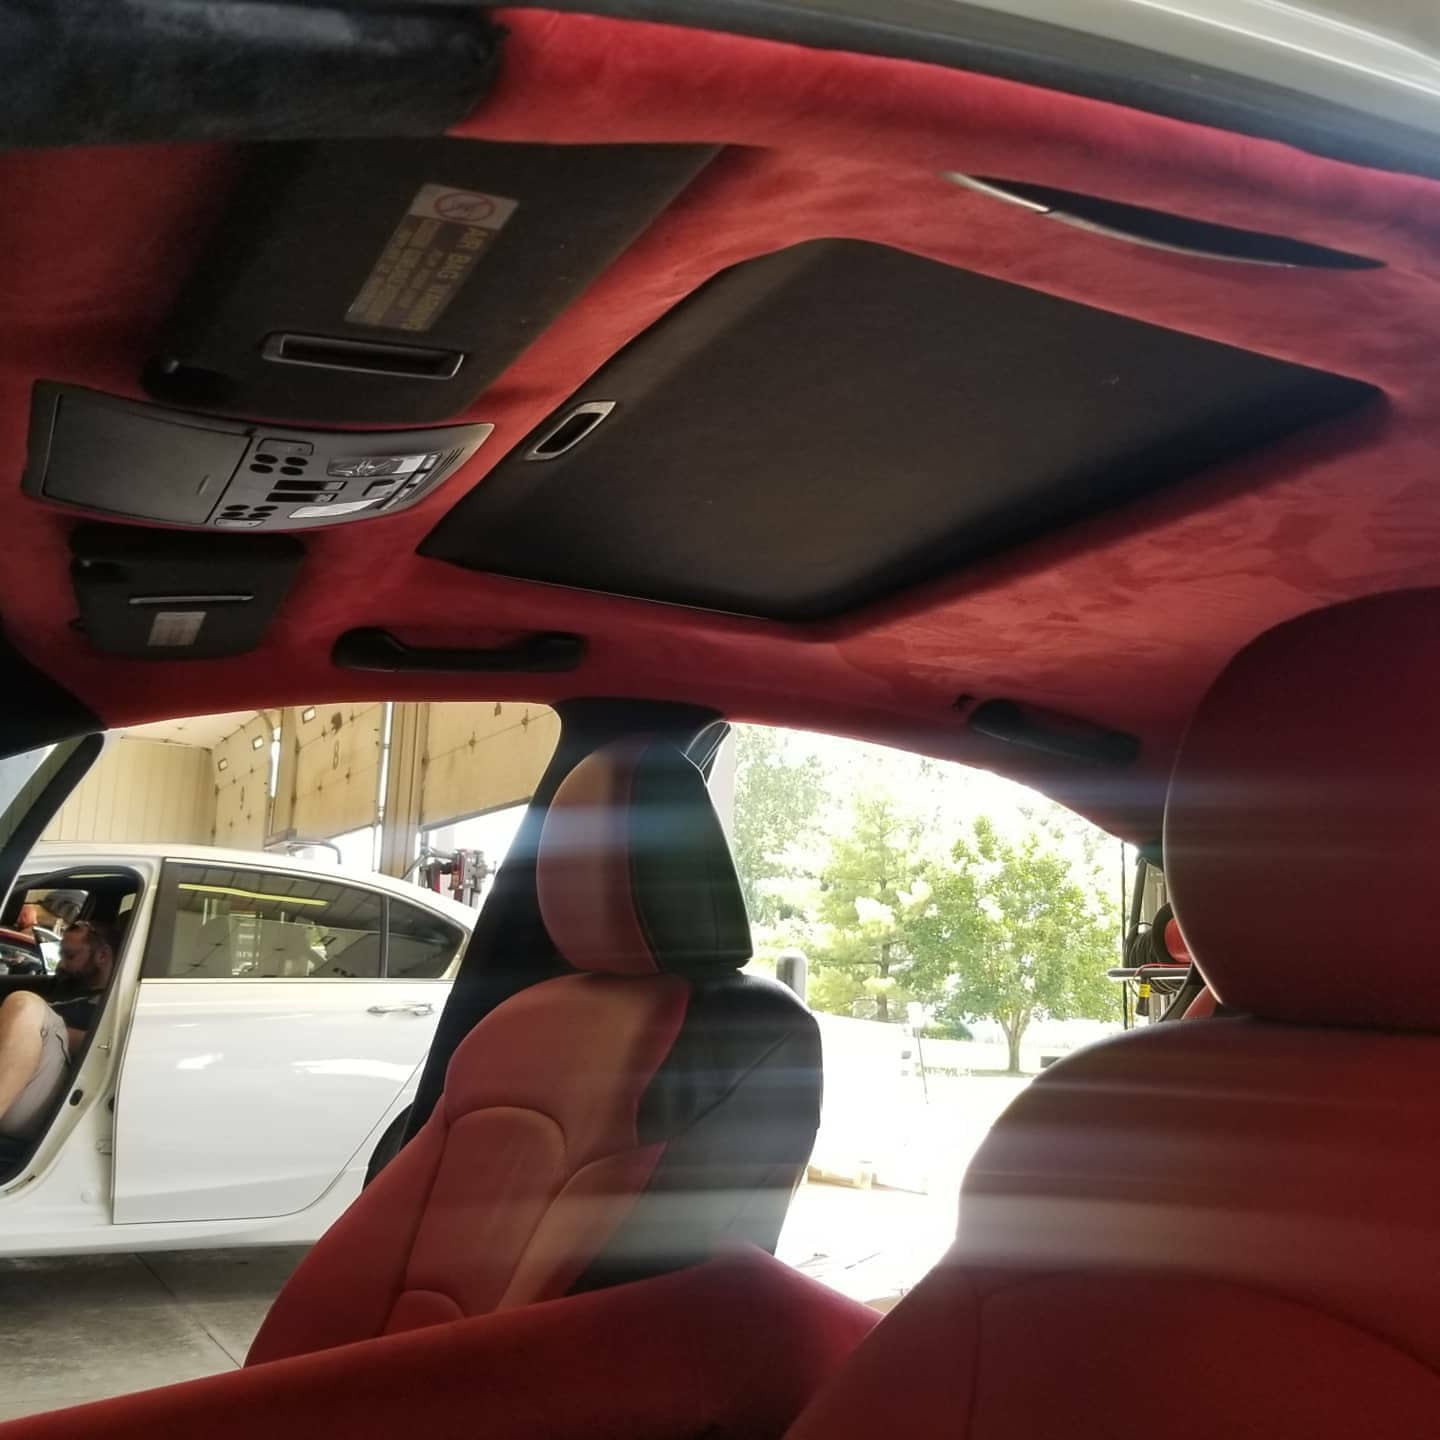 Interior/Upholstery - 2IS IS250 IS350 ISF red and black leather seats - New - 2006 to 2013 Lexus IS250 - Dublin, OH 43017, United States